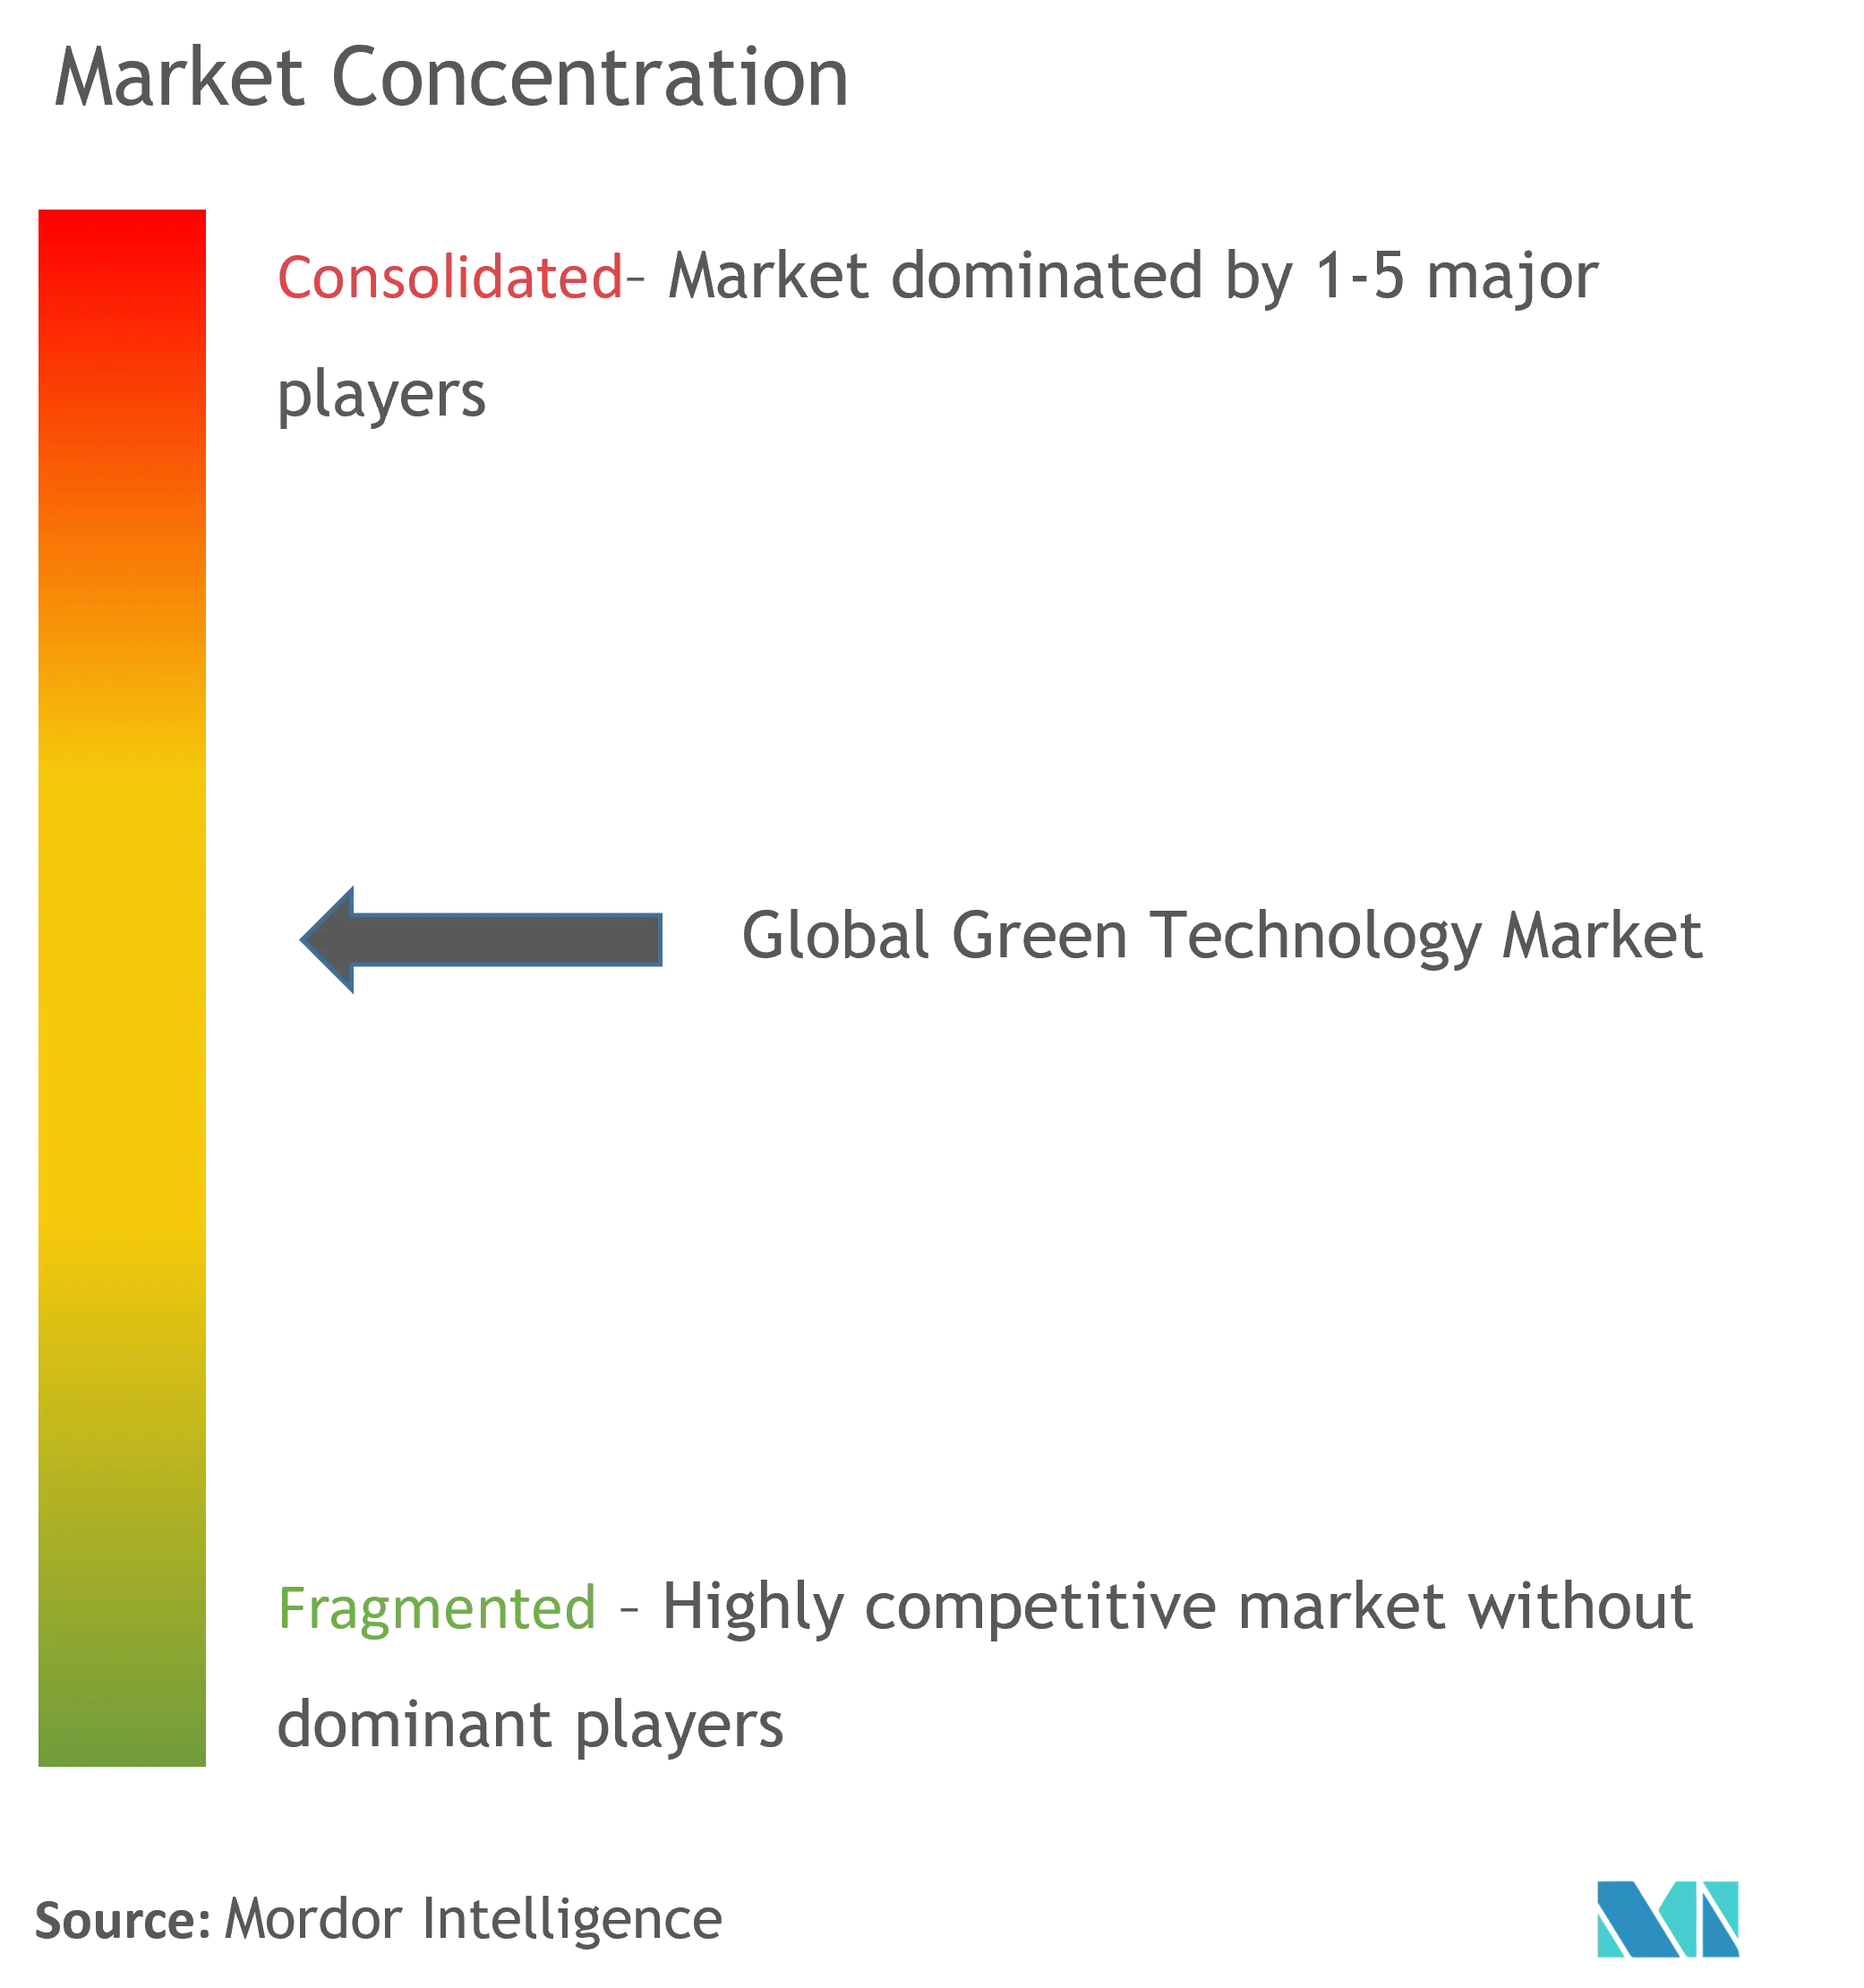 Green Technology Market Concentration